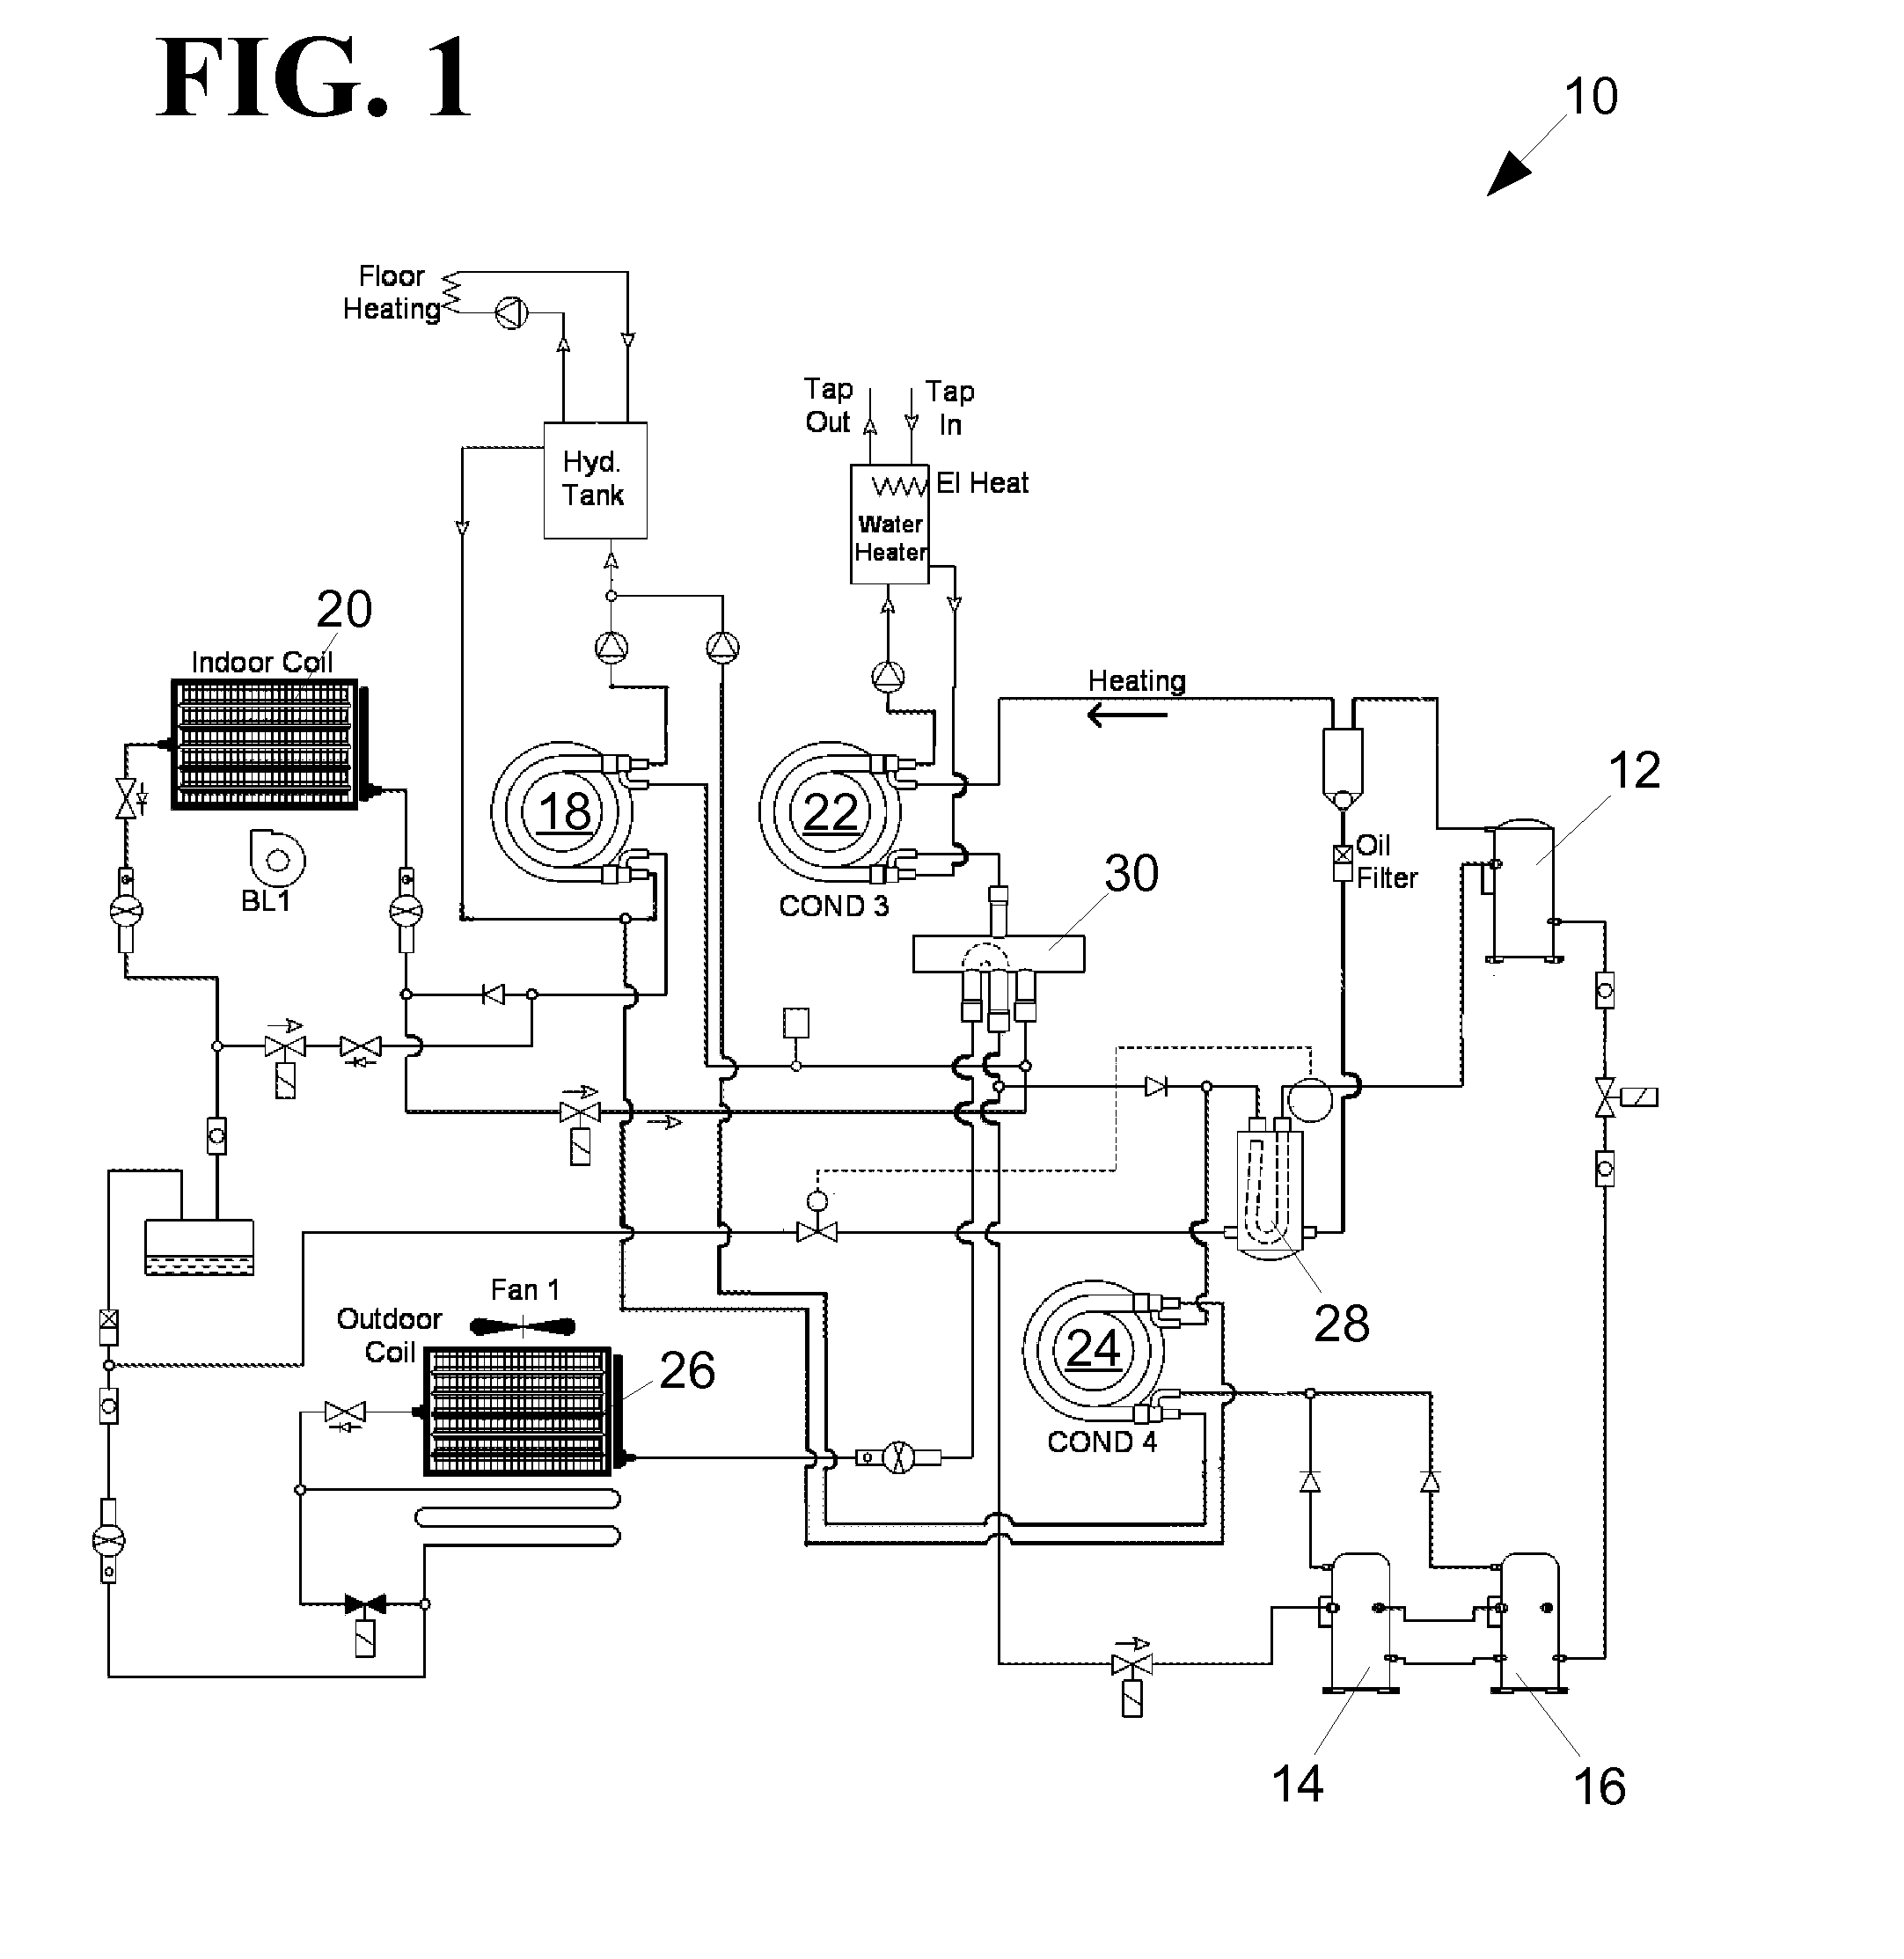 Heat pump system with extended run time boost compressor